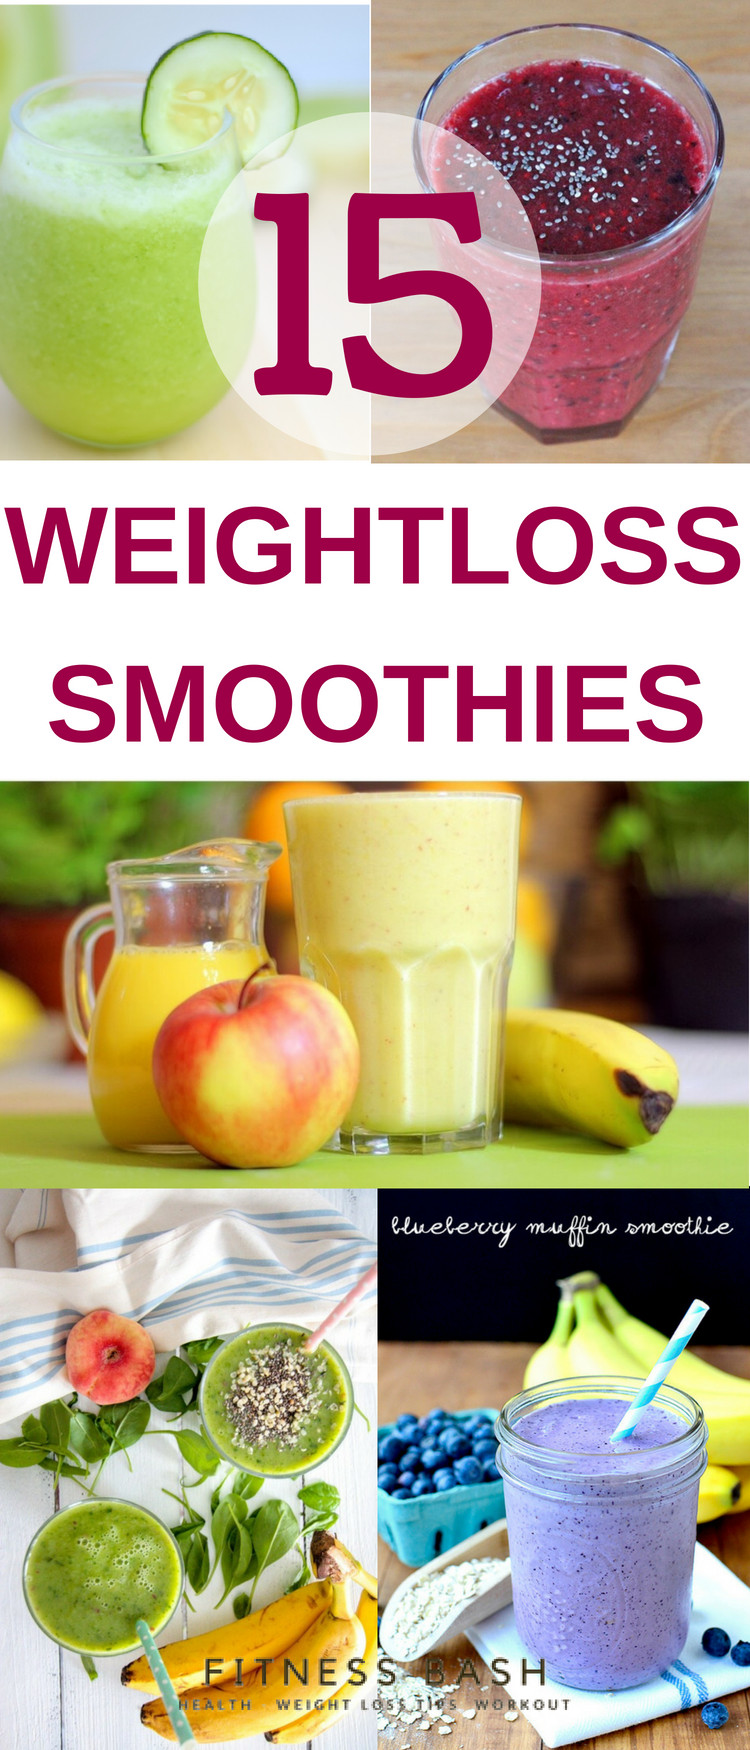 Meal Replacement Smoothies For Weight Loss
 Meal replacement weight loss smoothies for easy breakfast